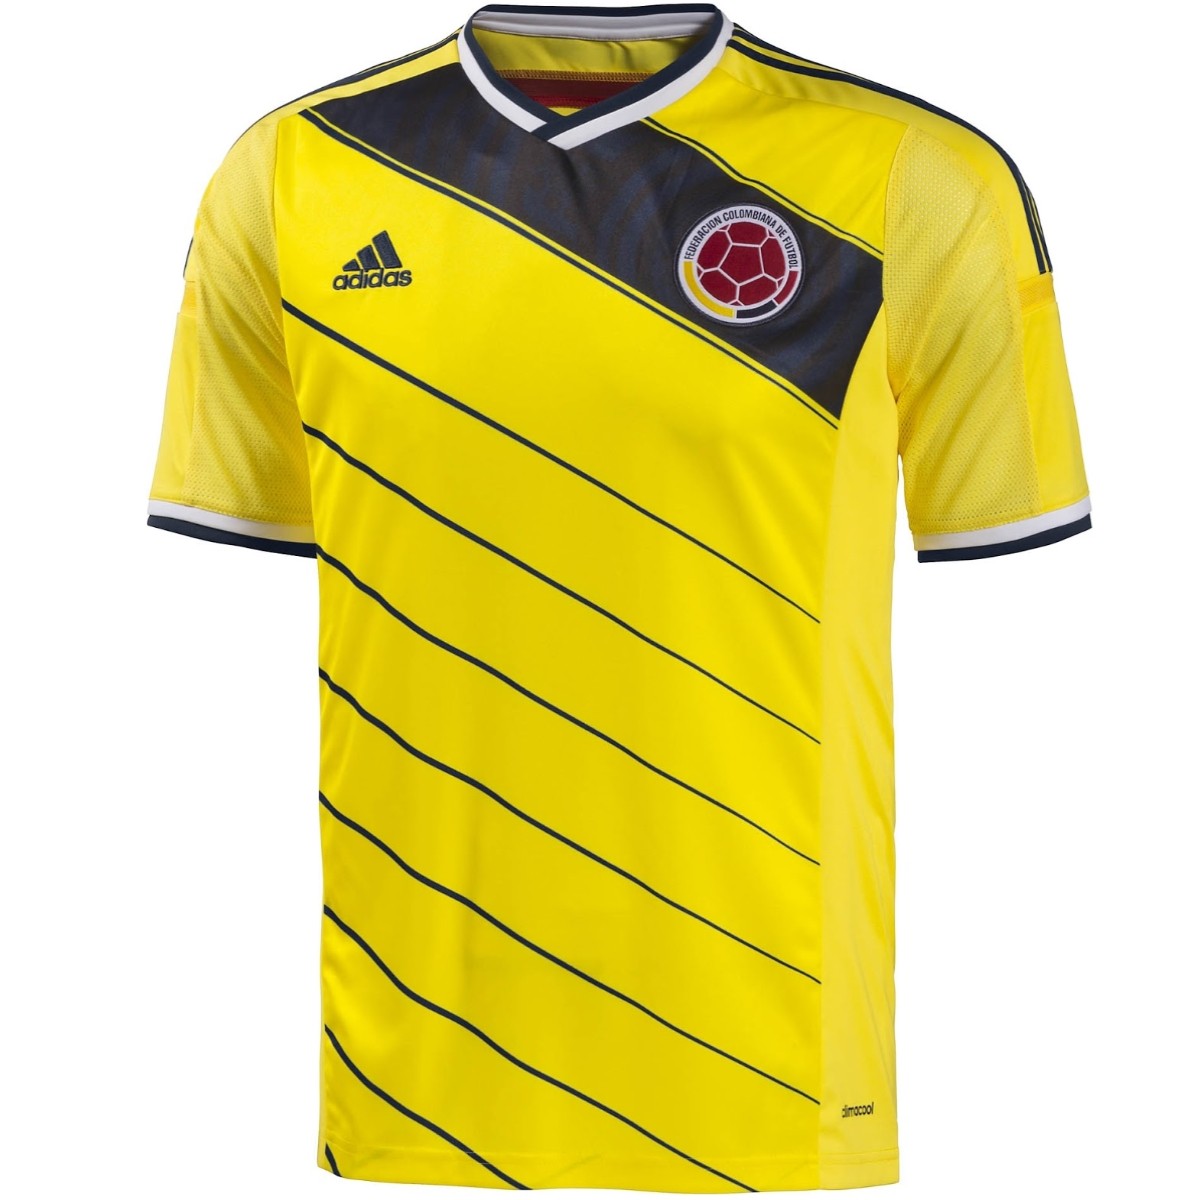 colombia football jersey